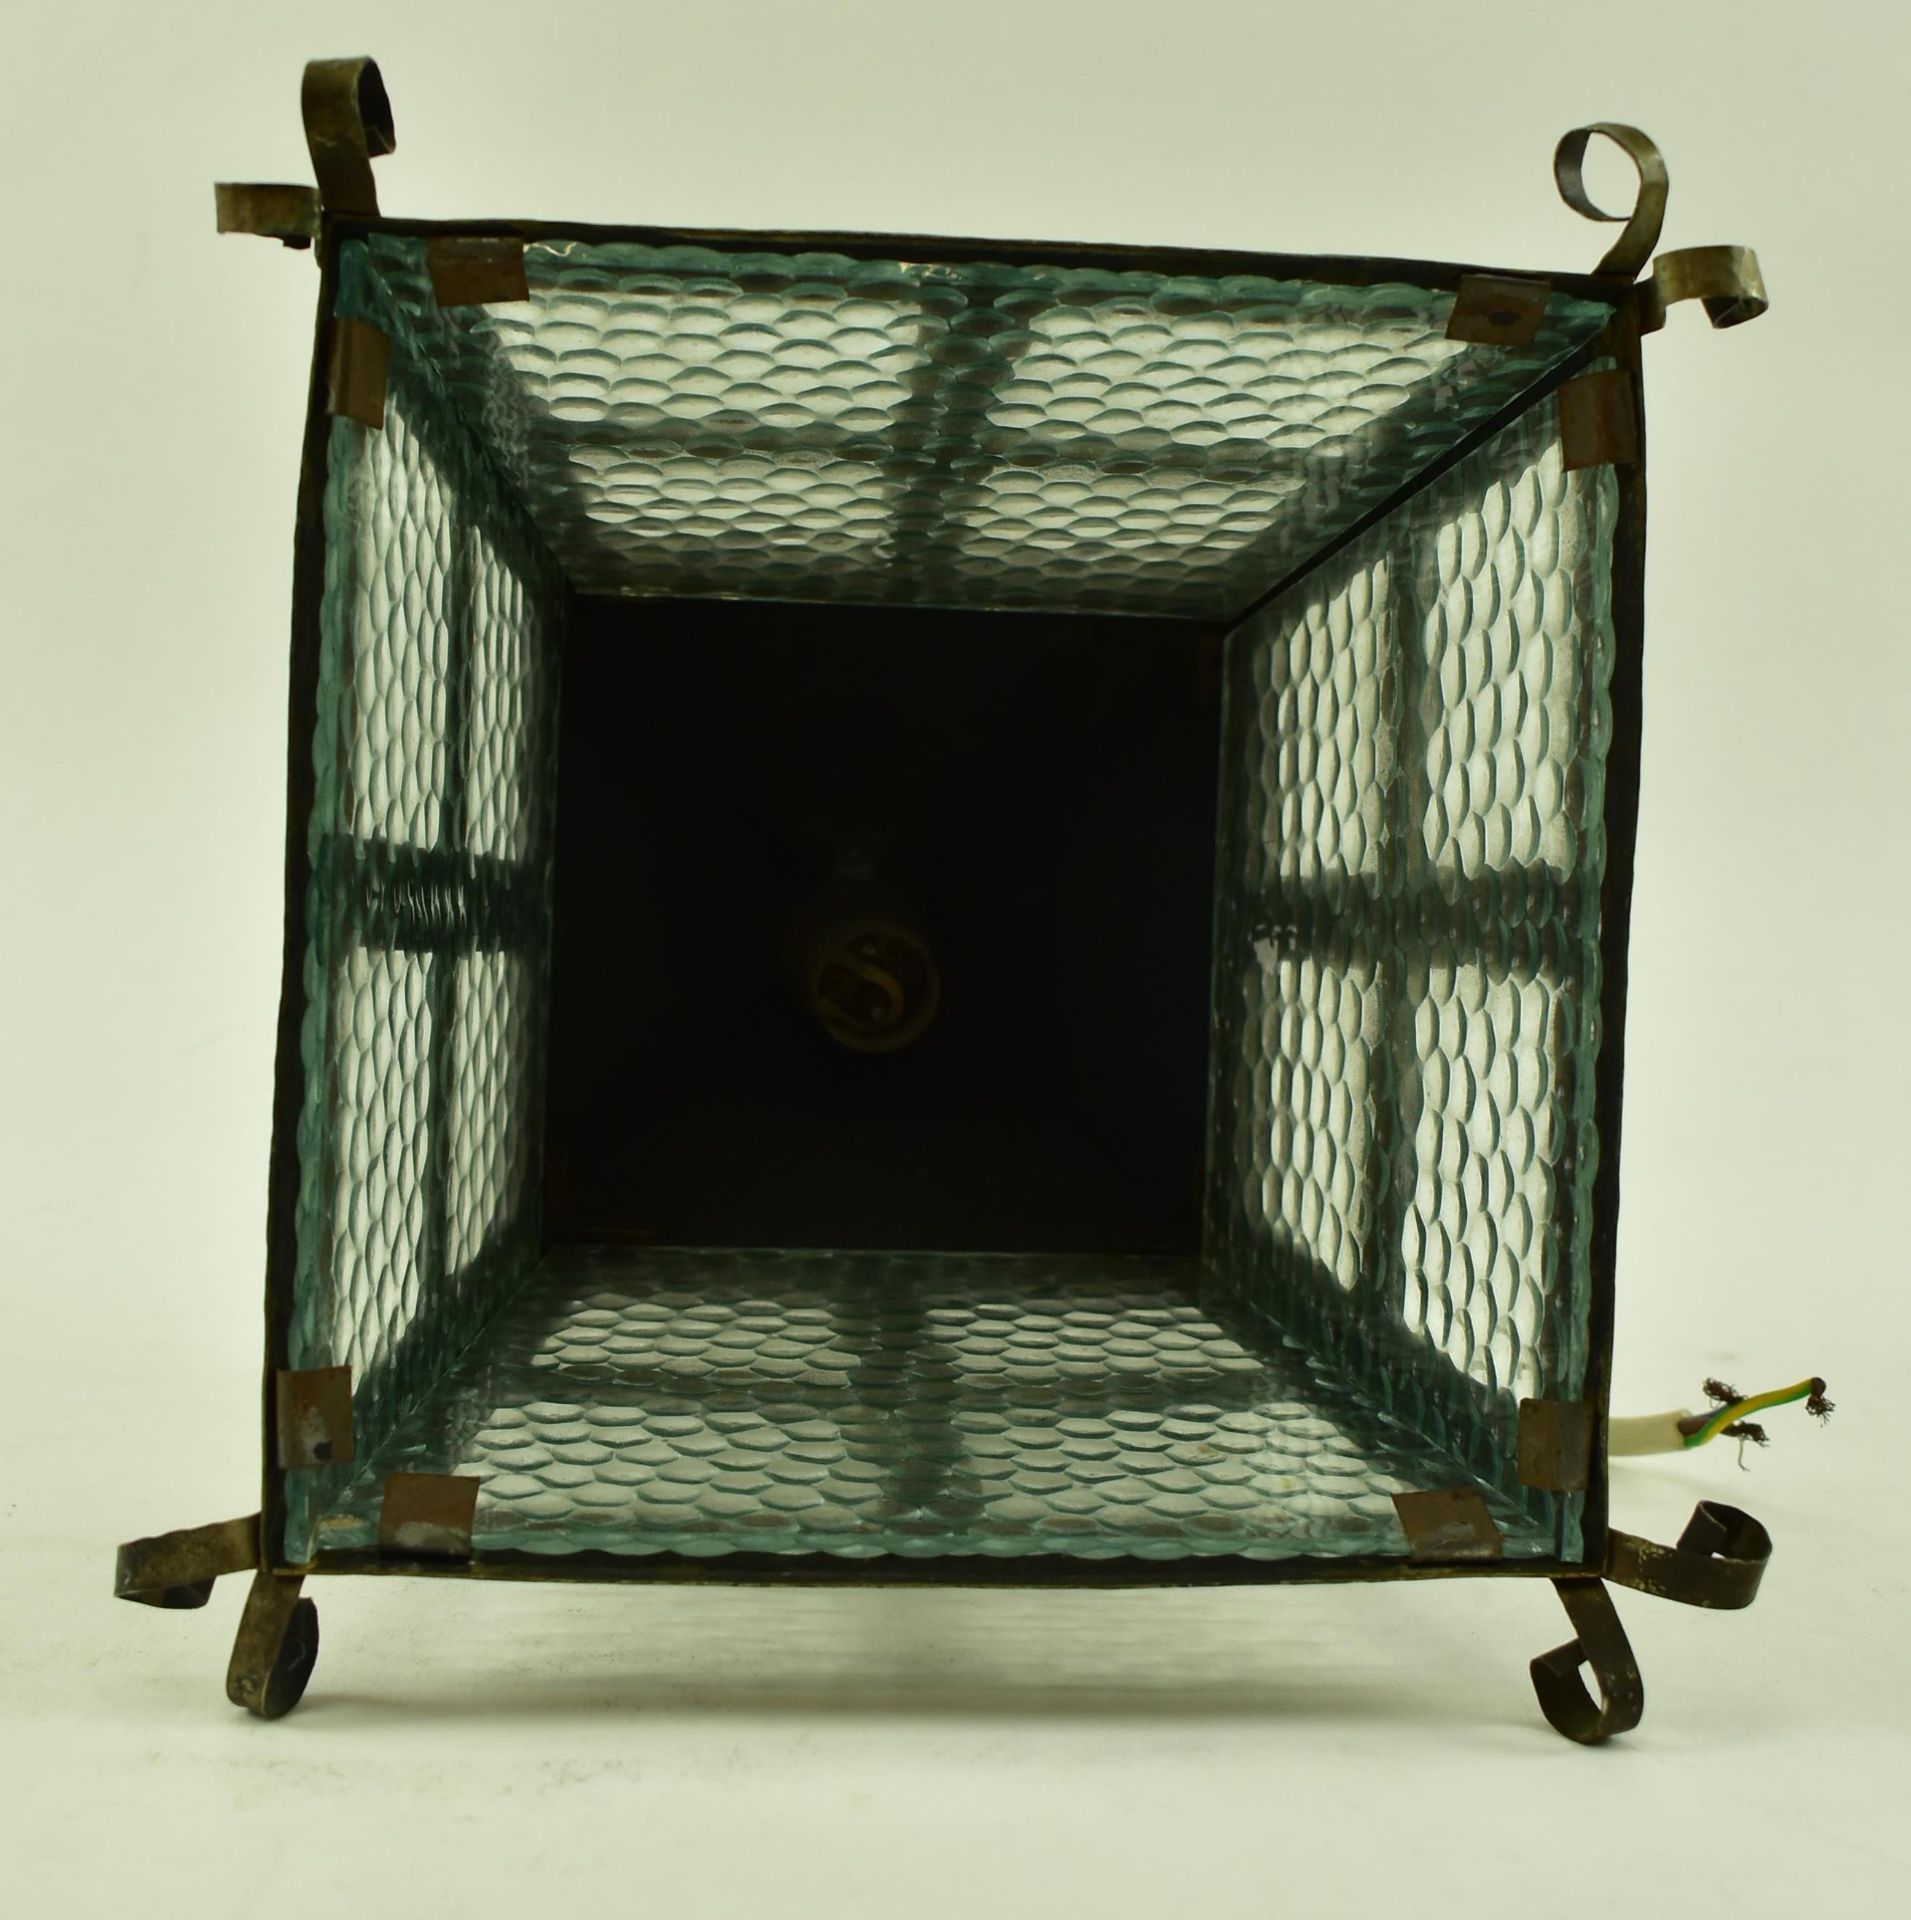 EARLY 20TH CENTURY ARTS & CRAFTS HANGING PORCH LANTERN - Image 5 of 5